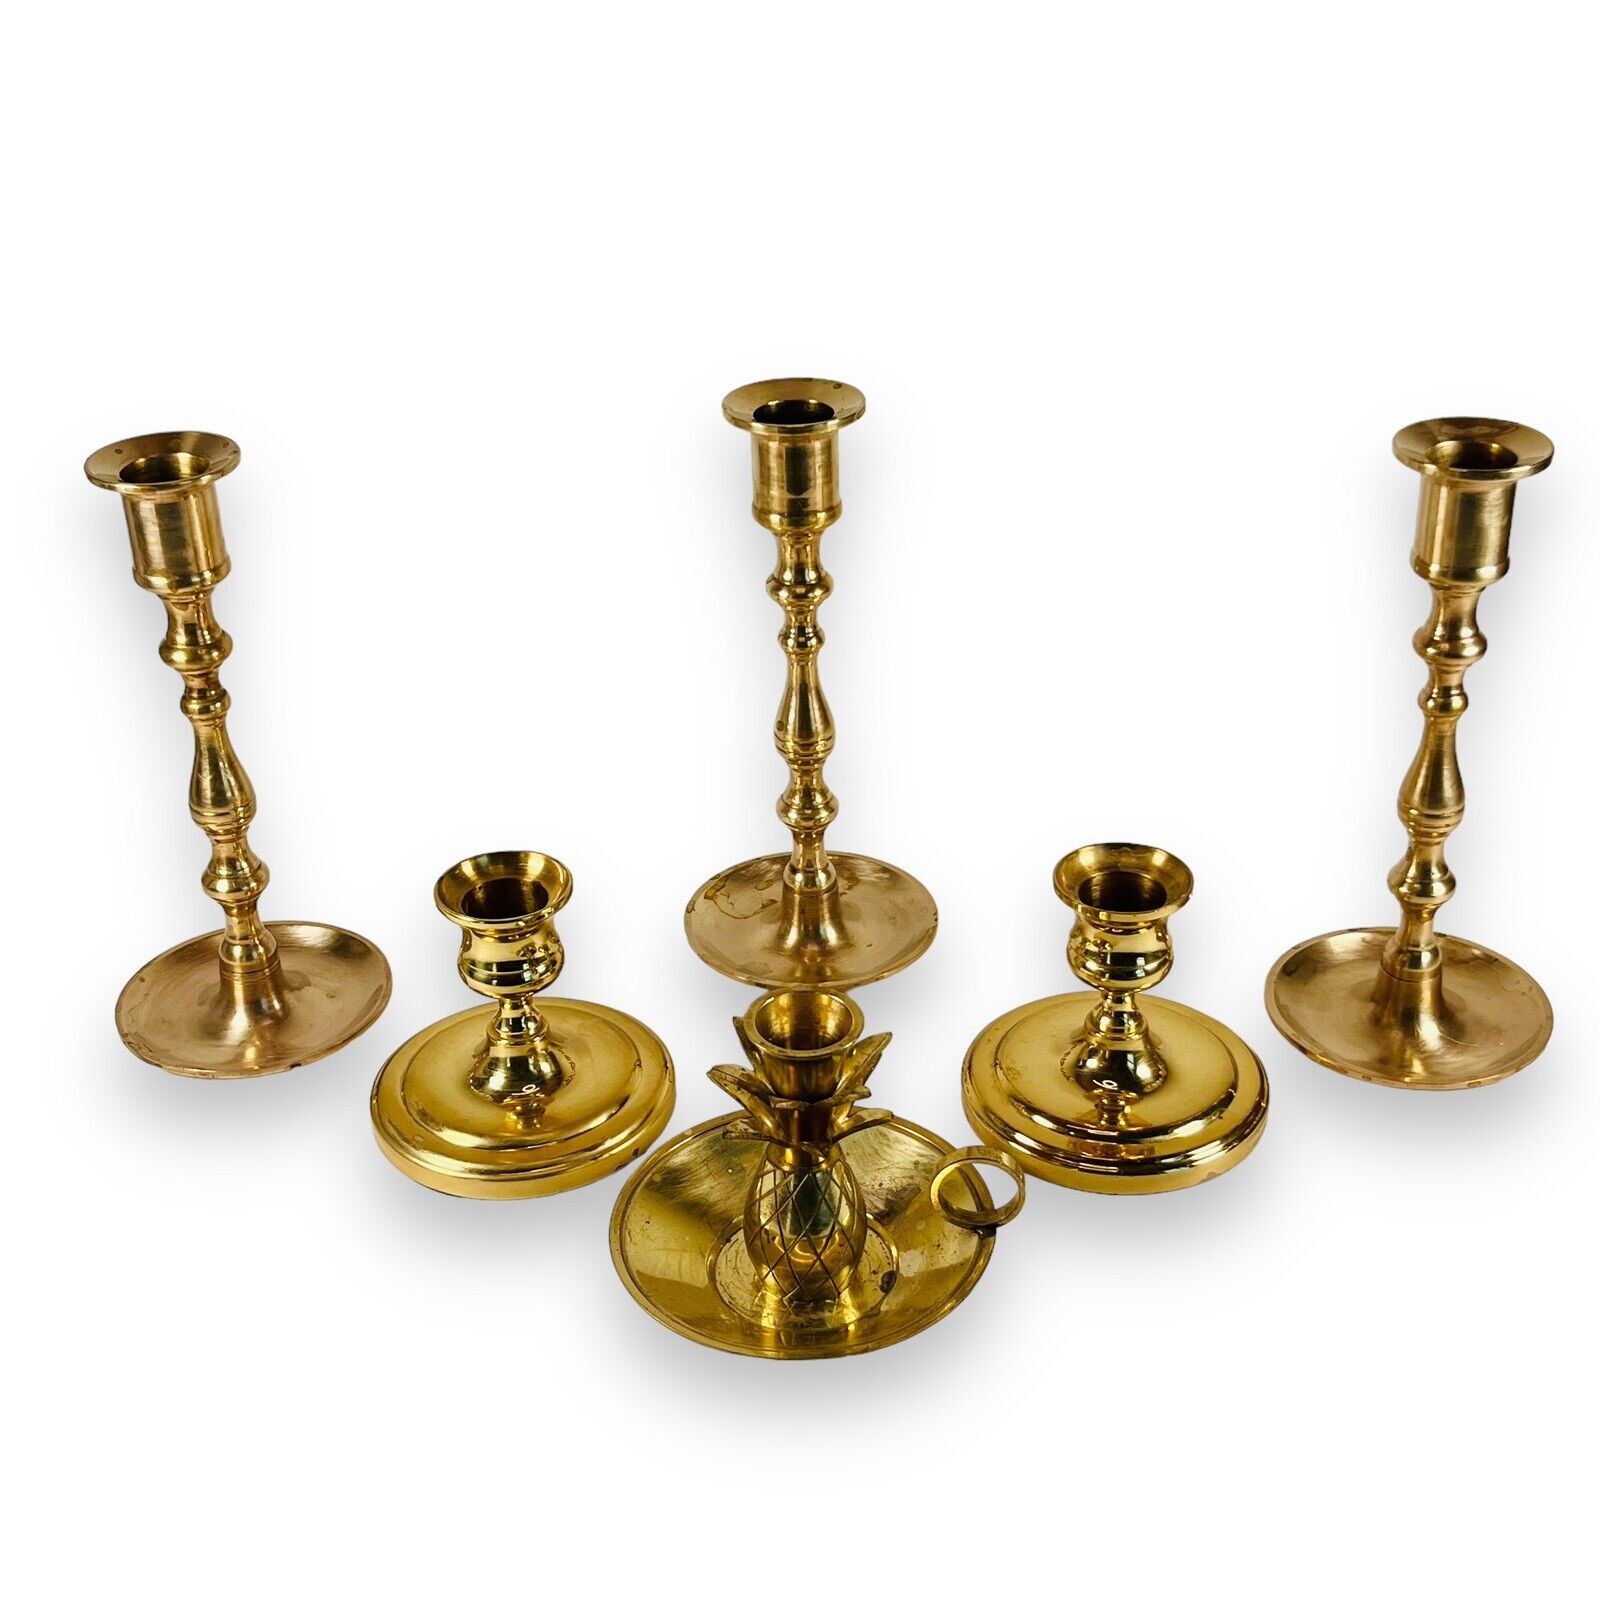 Lot of 6 Vintage Brass Candlesticks Candle Holders 1 India 2 Baldwin 3-7” Tall